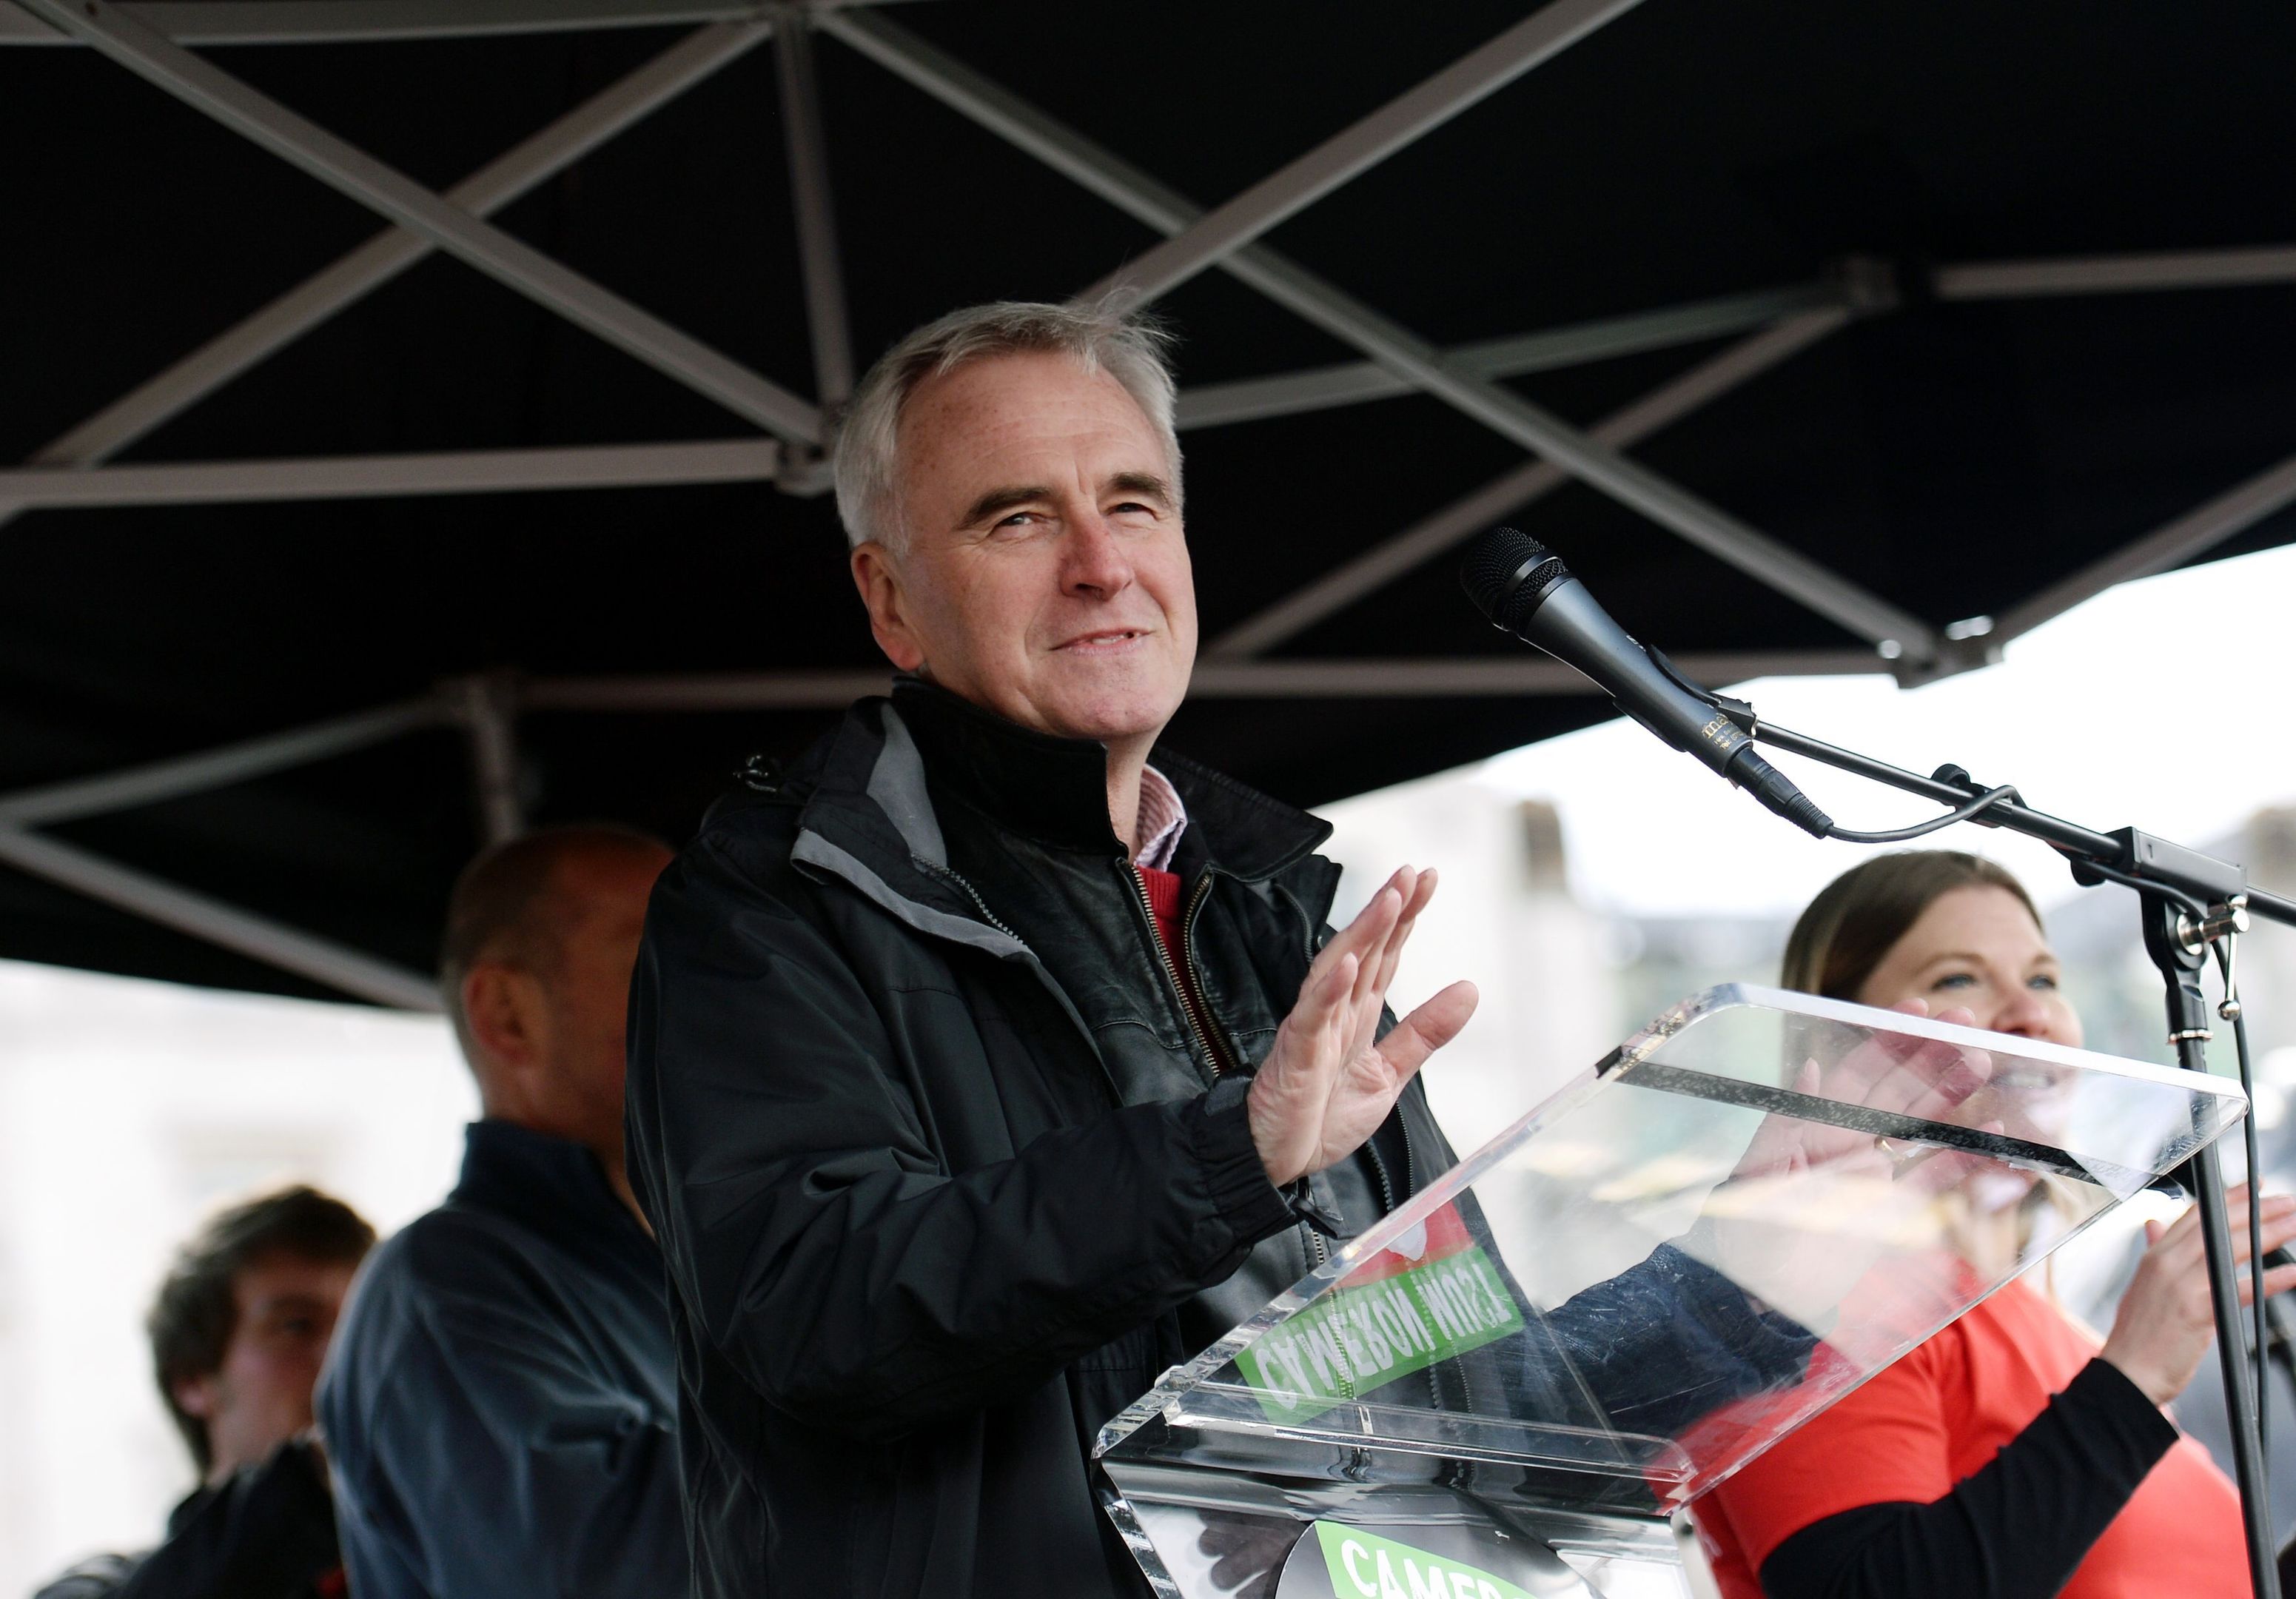 Shadow Chancellor John McDonnell speaks at an anti-austerity demonstration in central London.